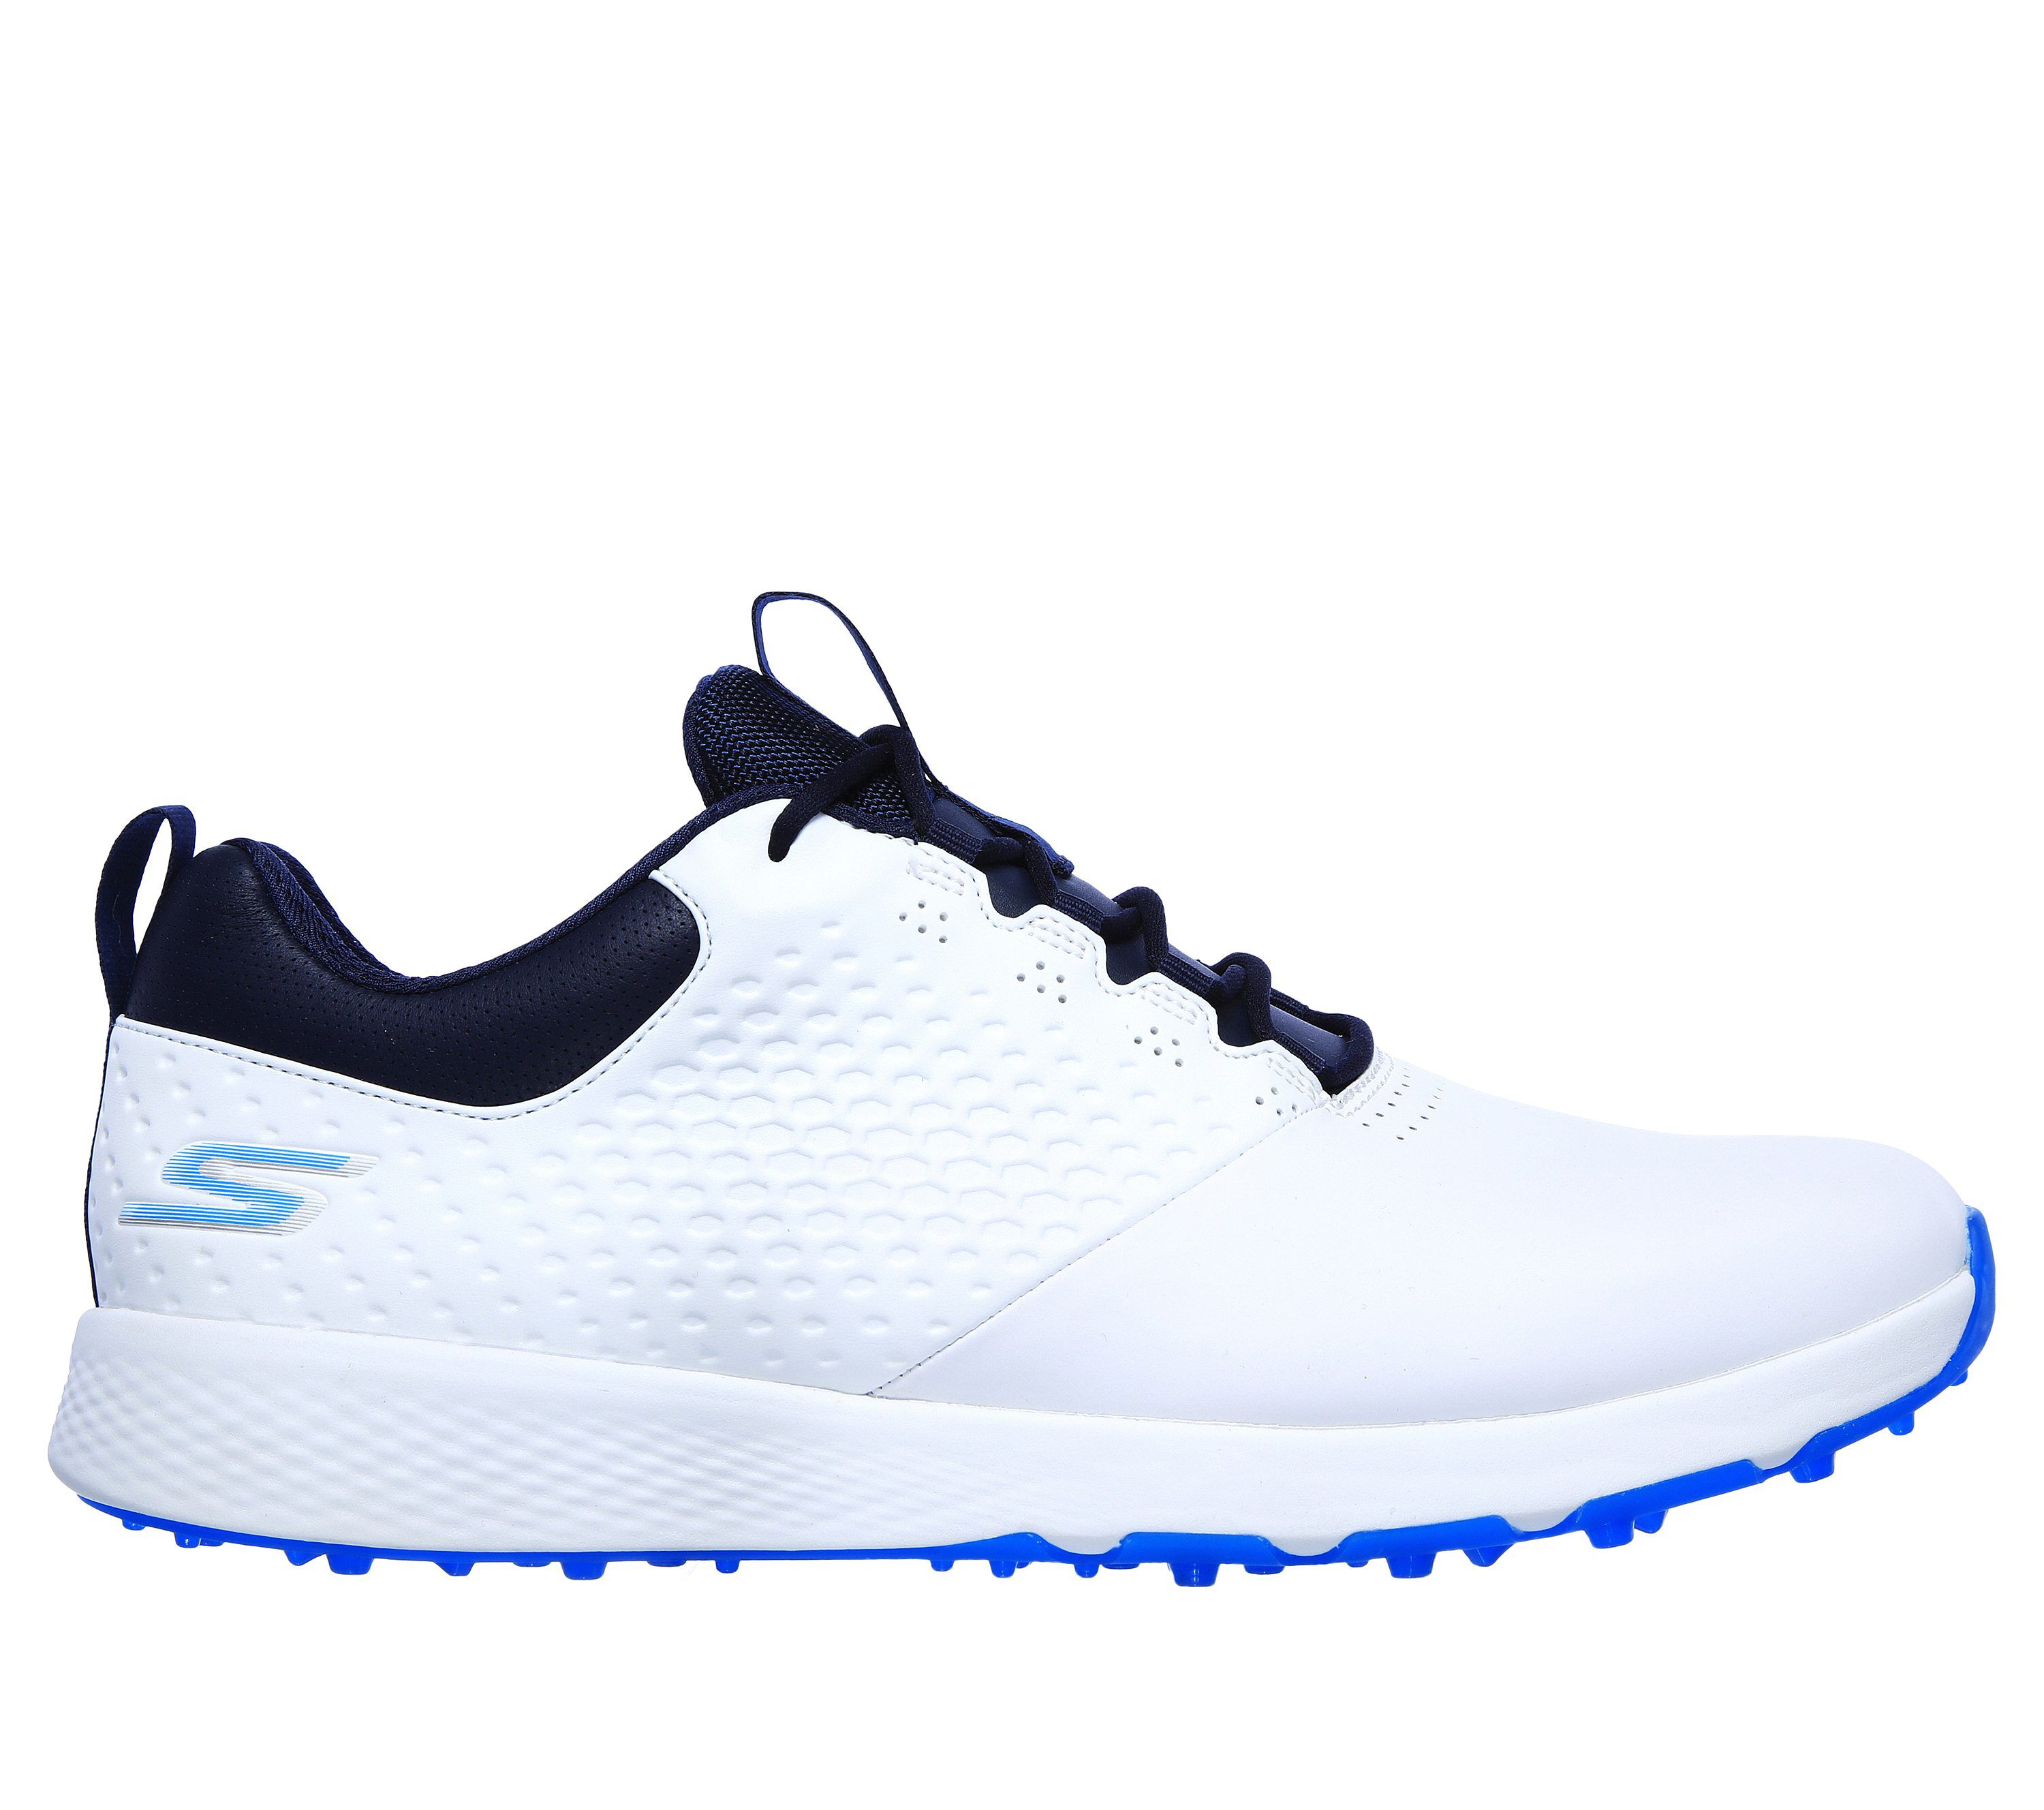 where can i buy skechers golf shoes in canada